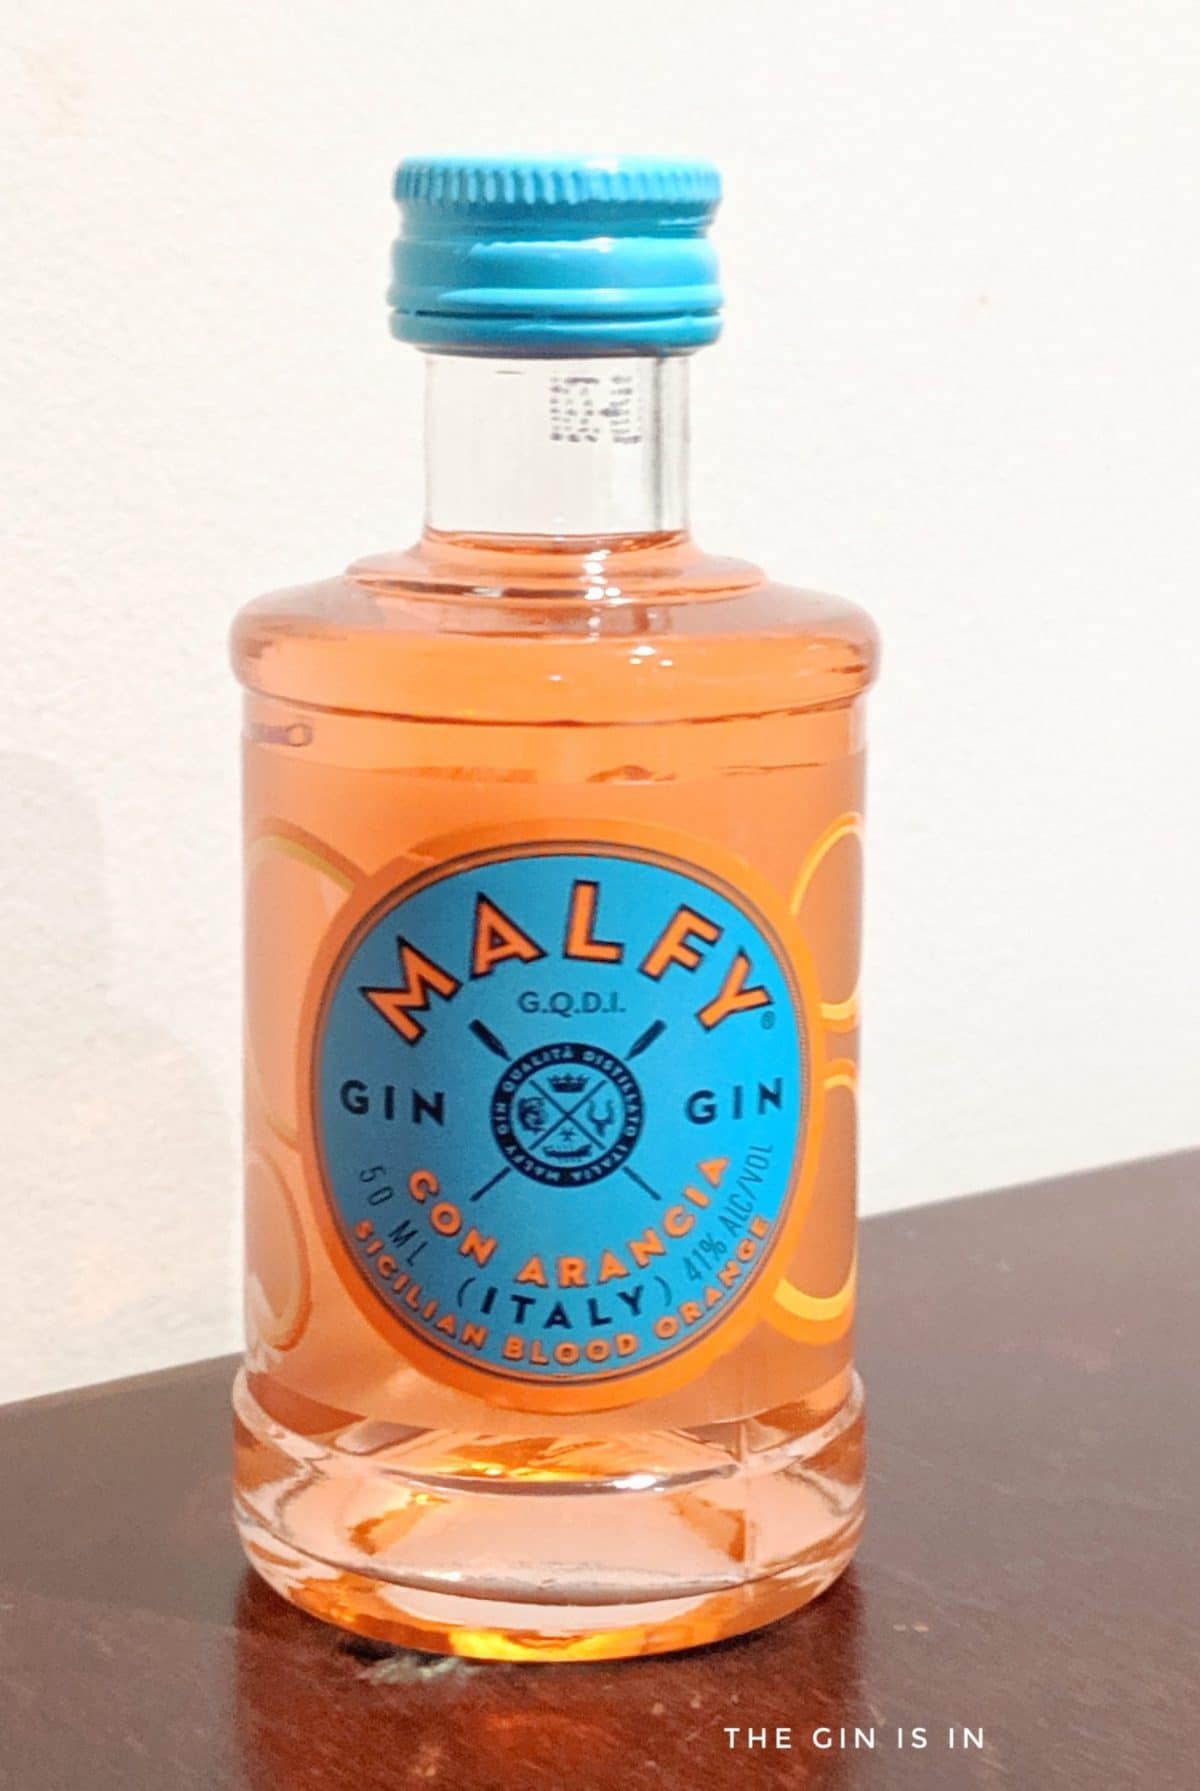 Malfy Gin Con Arancia | Expert Gin Review and Tasting Notes